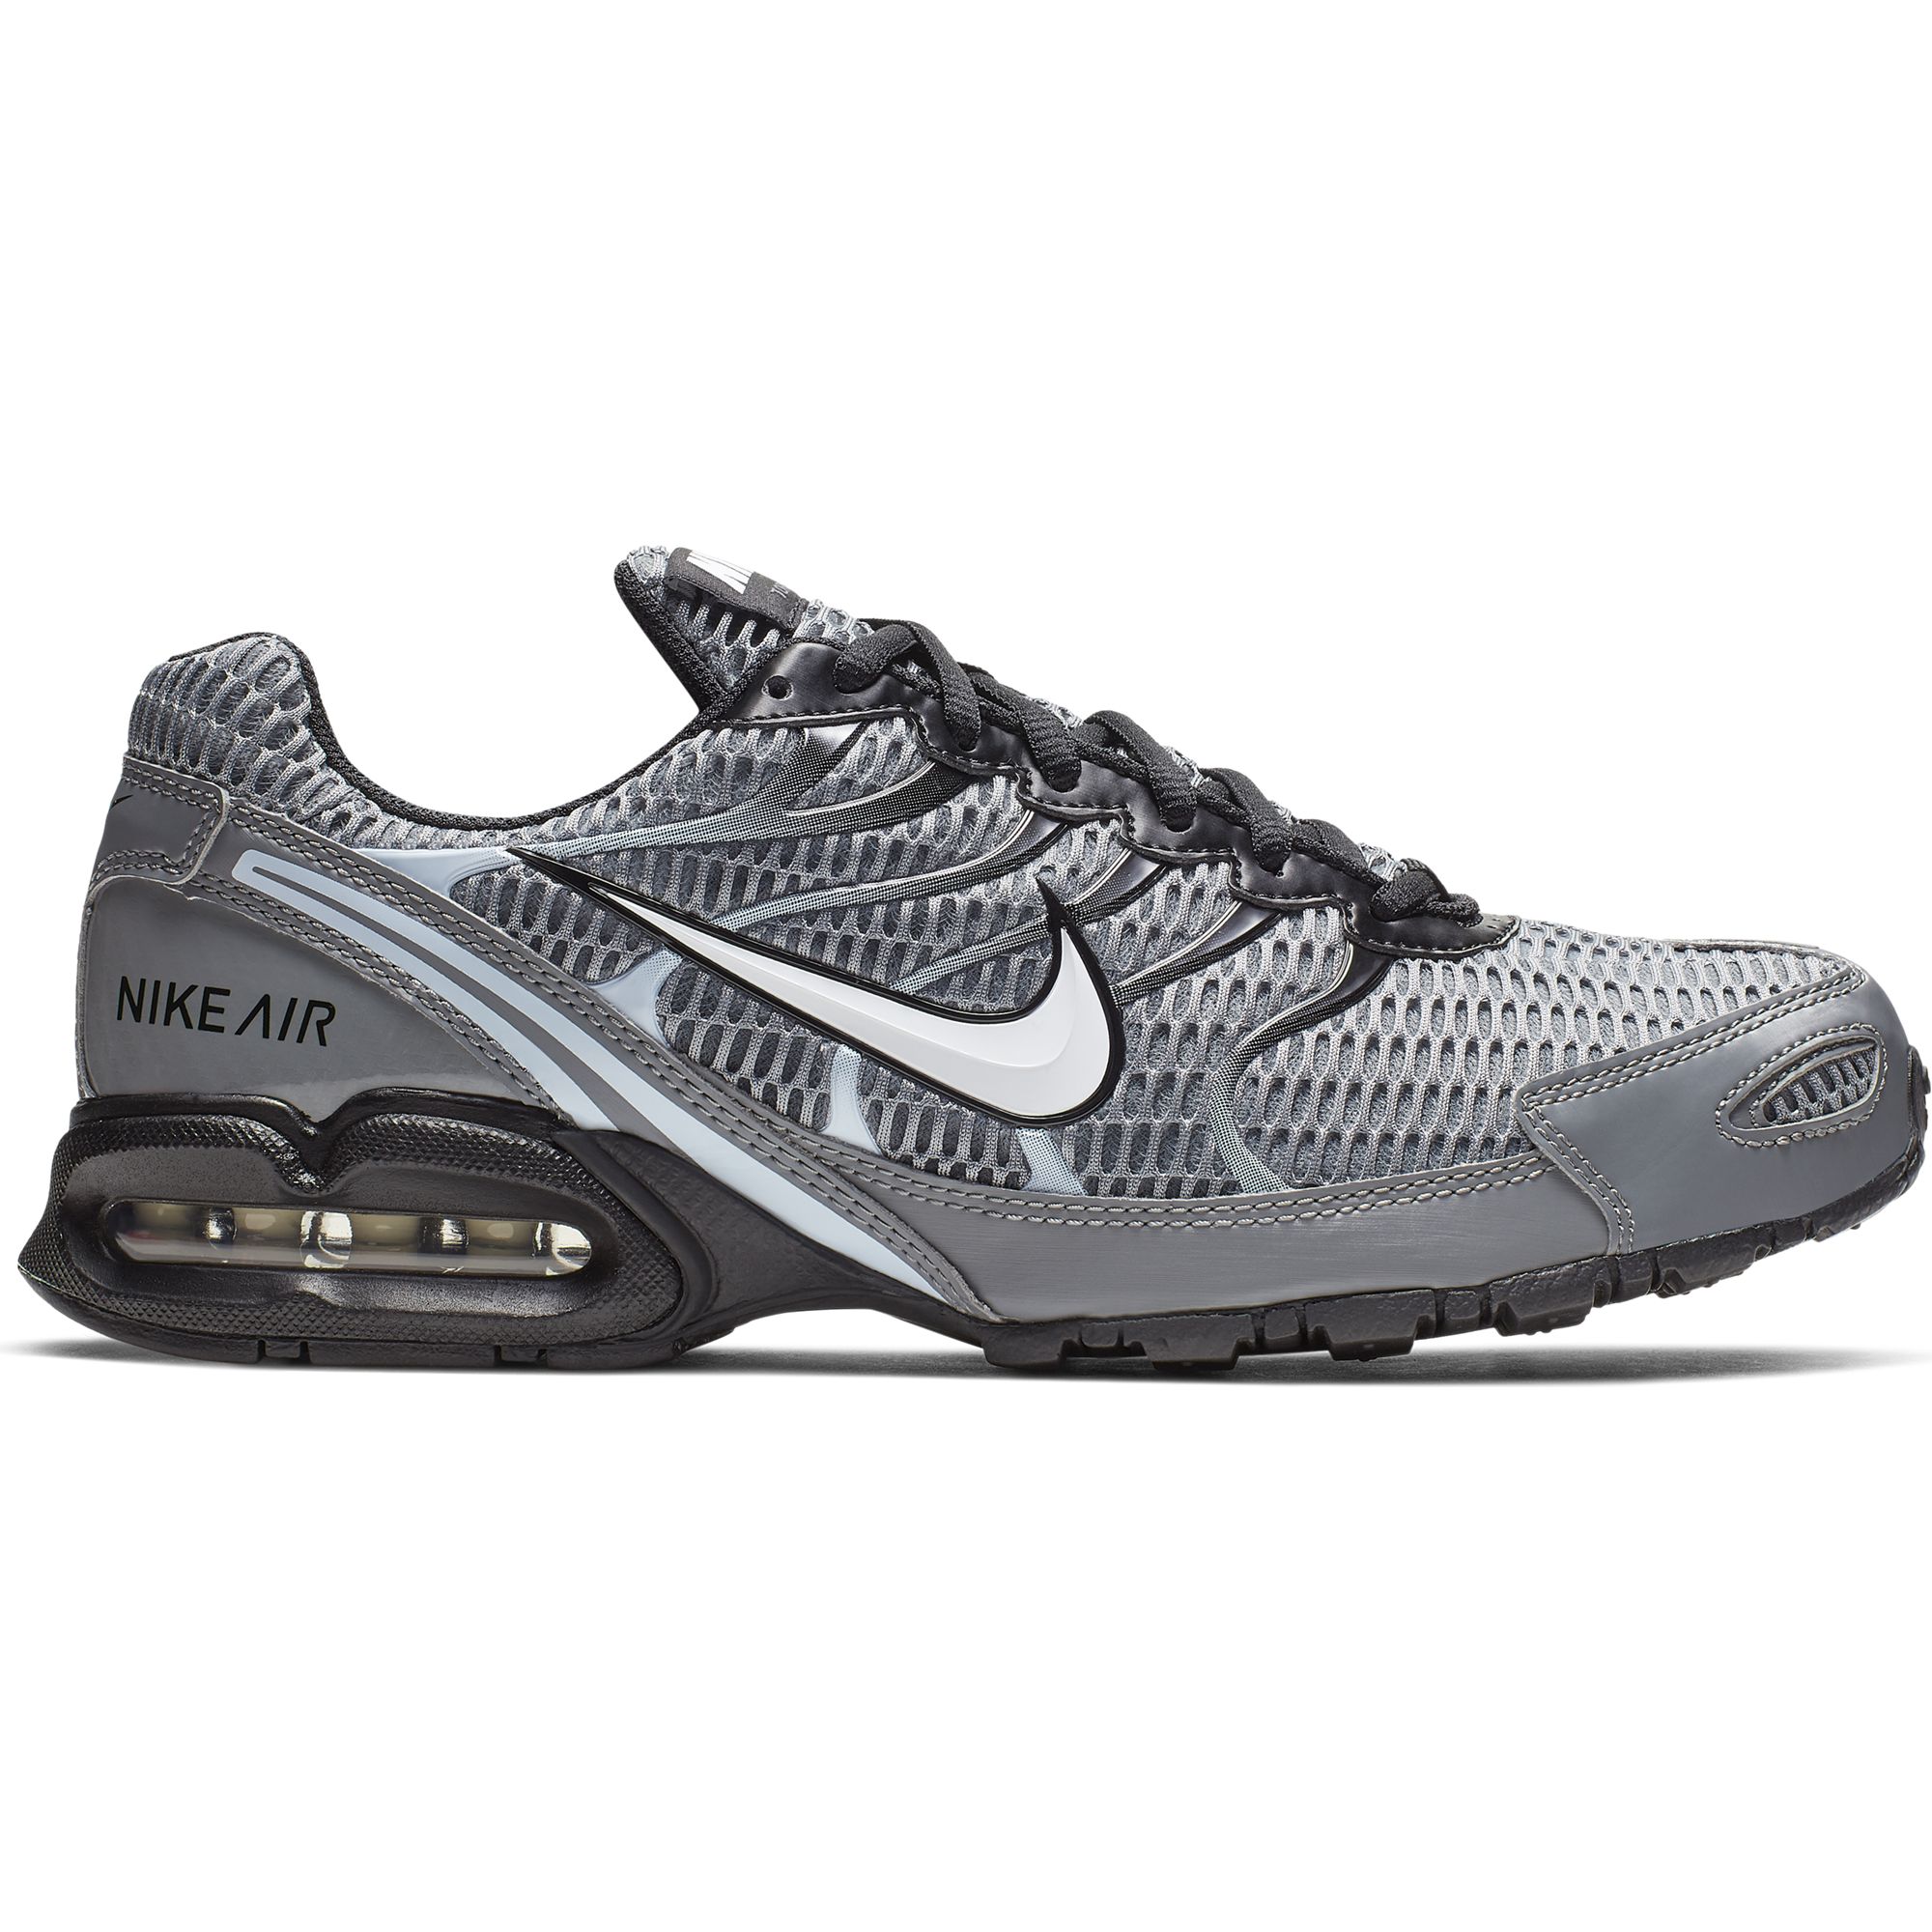 Men's Air Max Torch 4 Running Sneakers from Finish Line